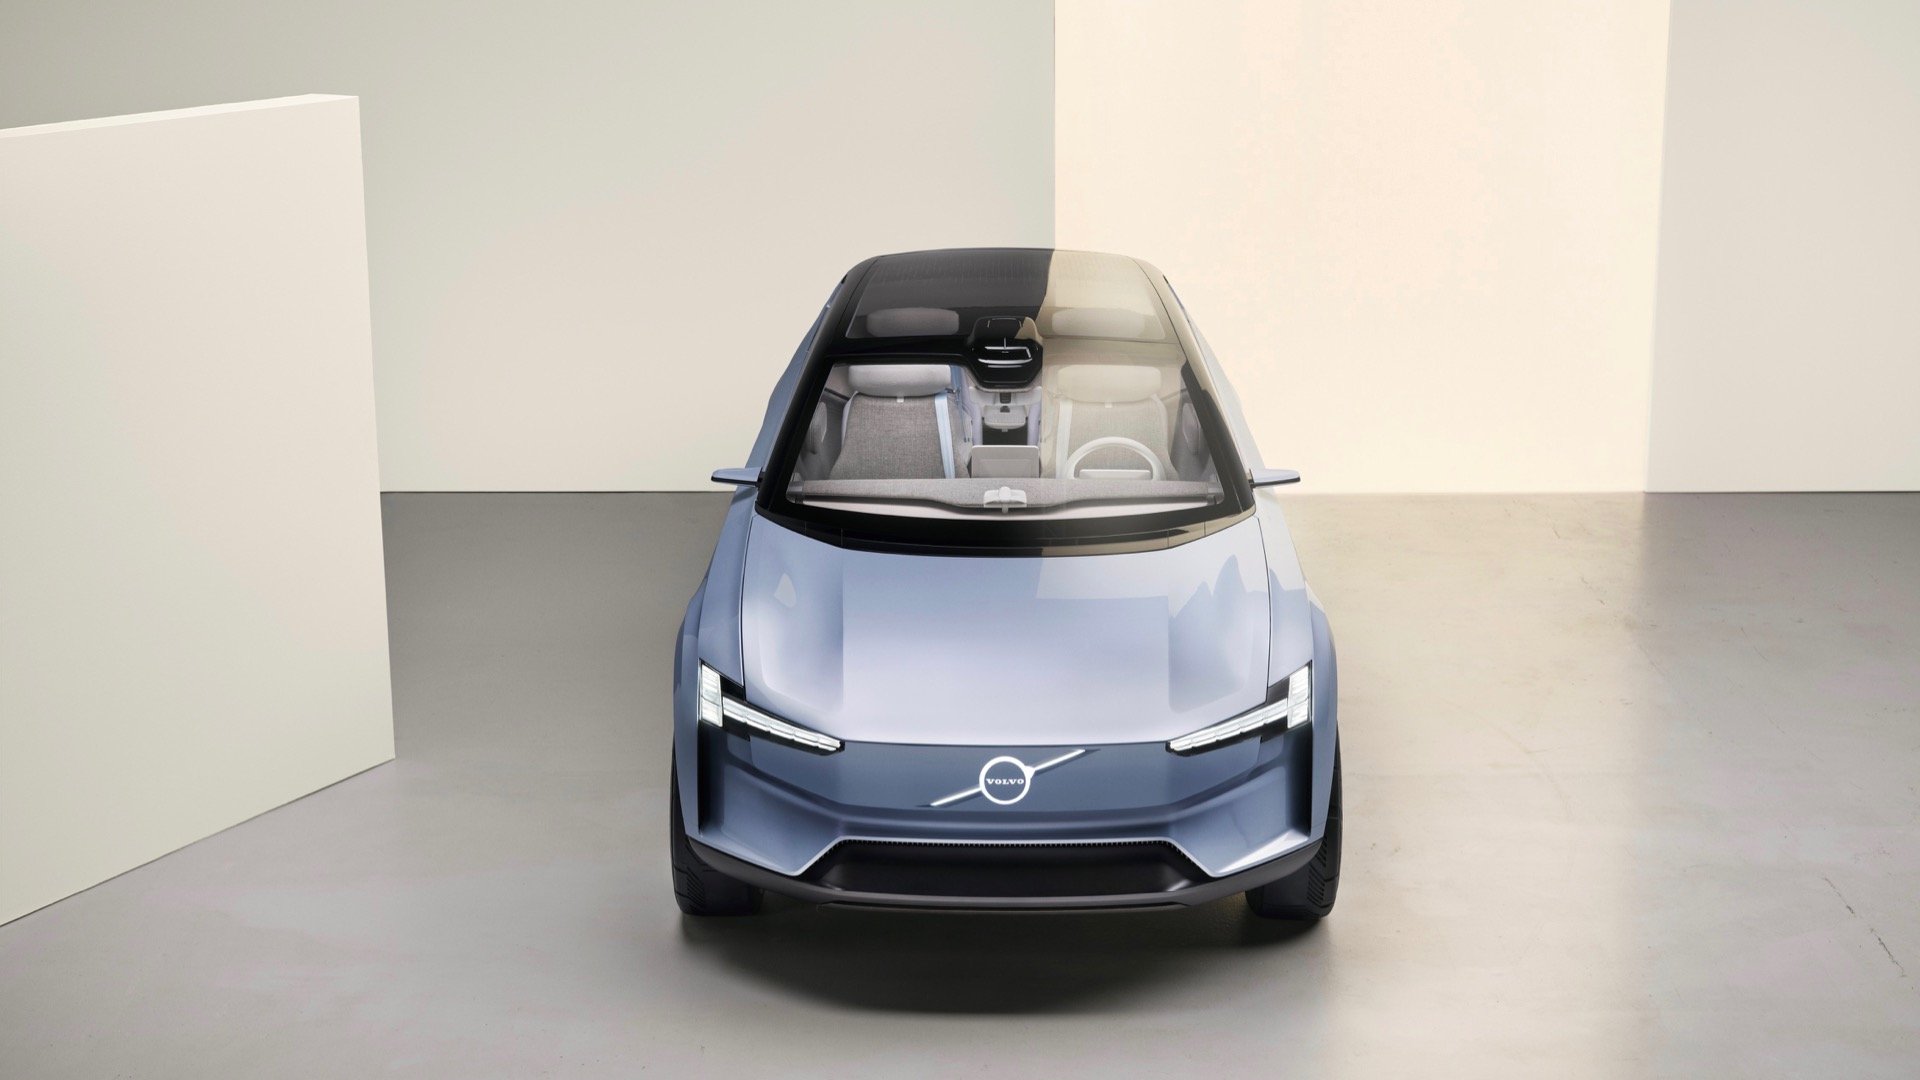 Volvo Ride Pilot feature for Electric Vehicles